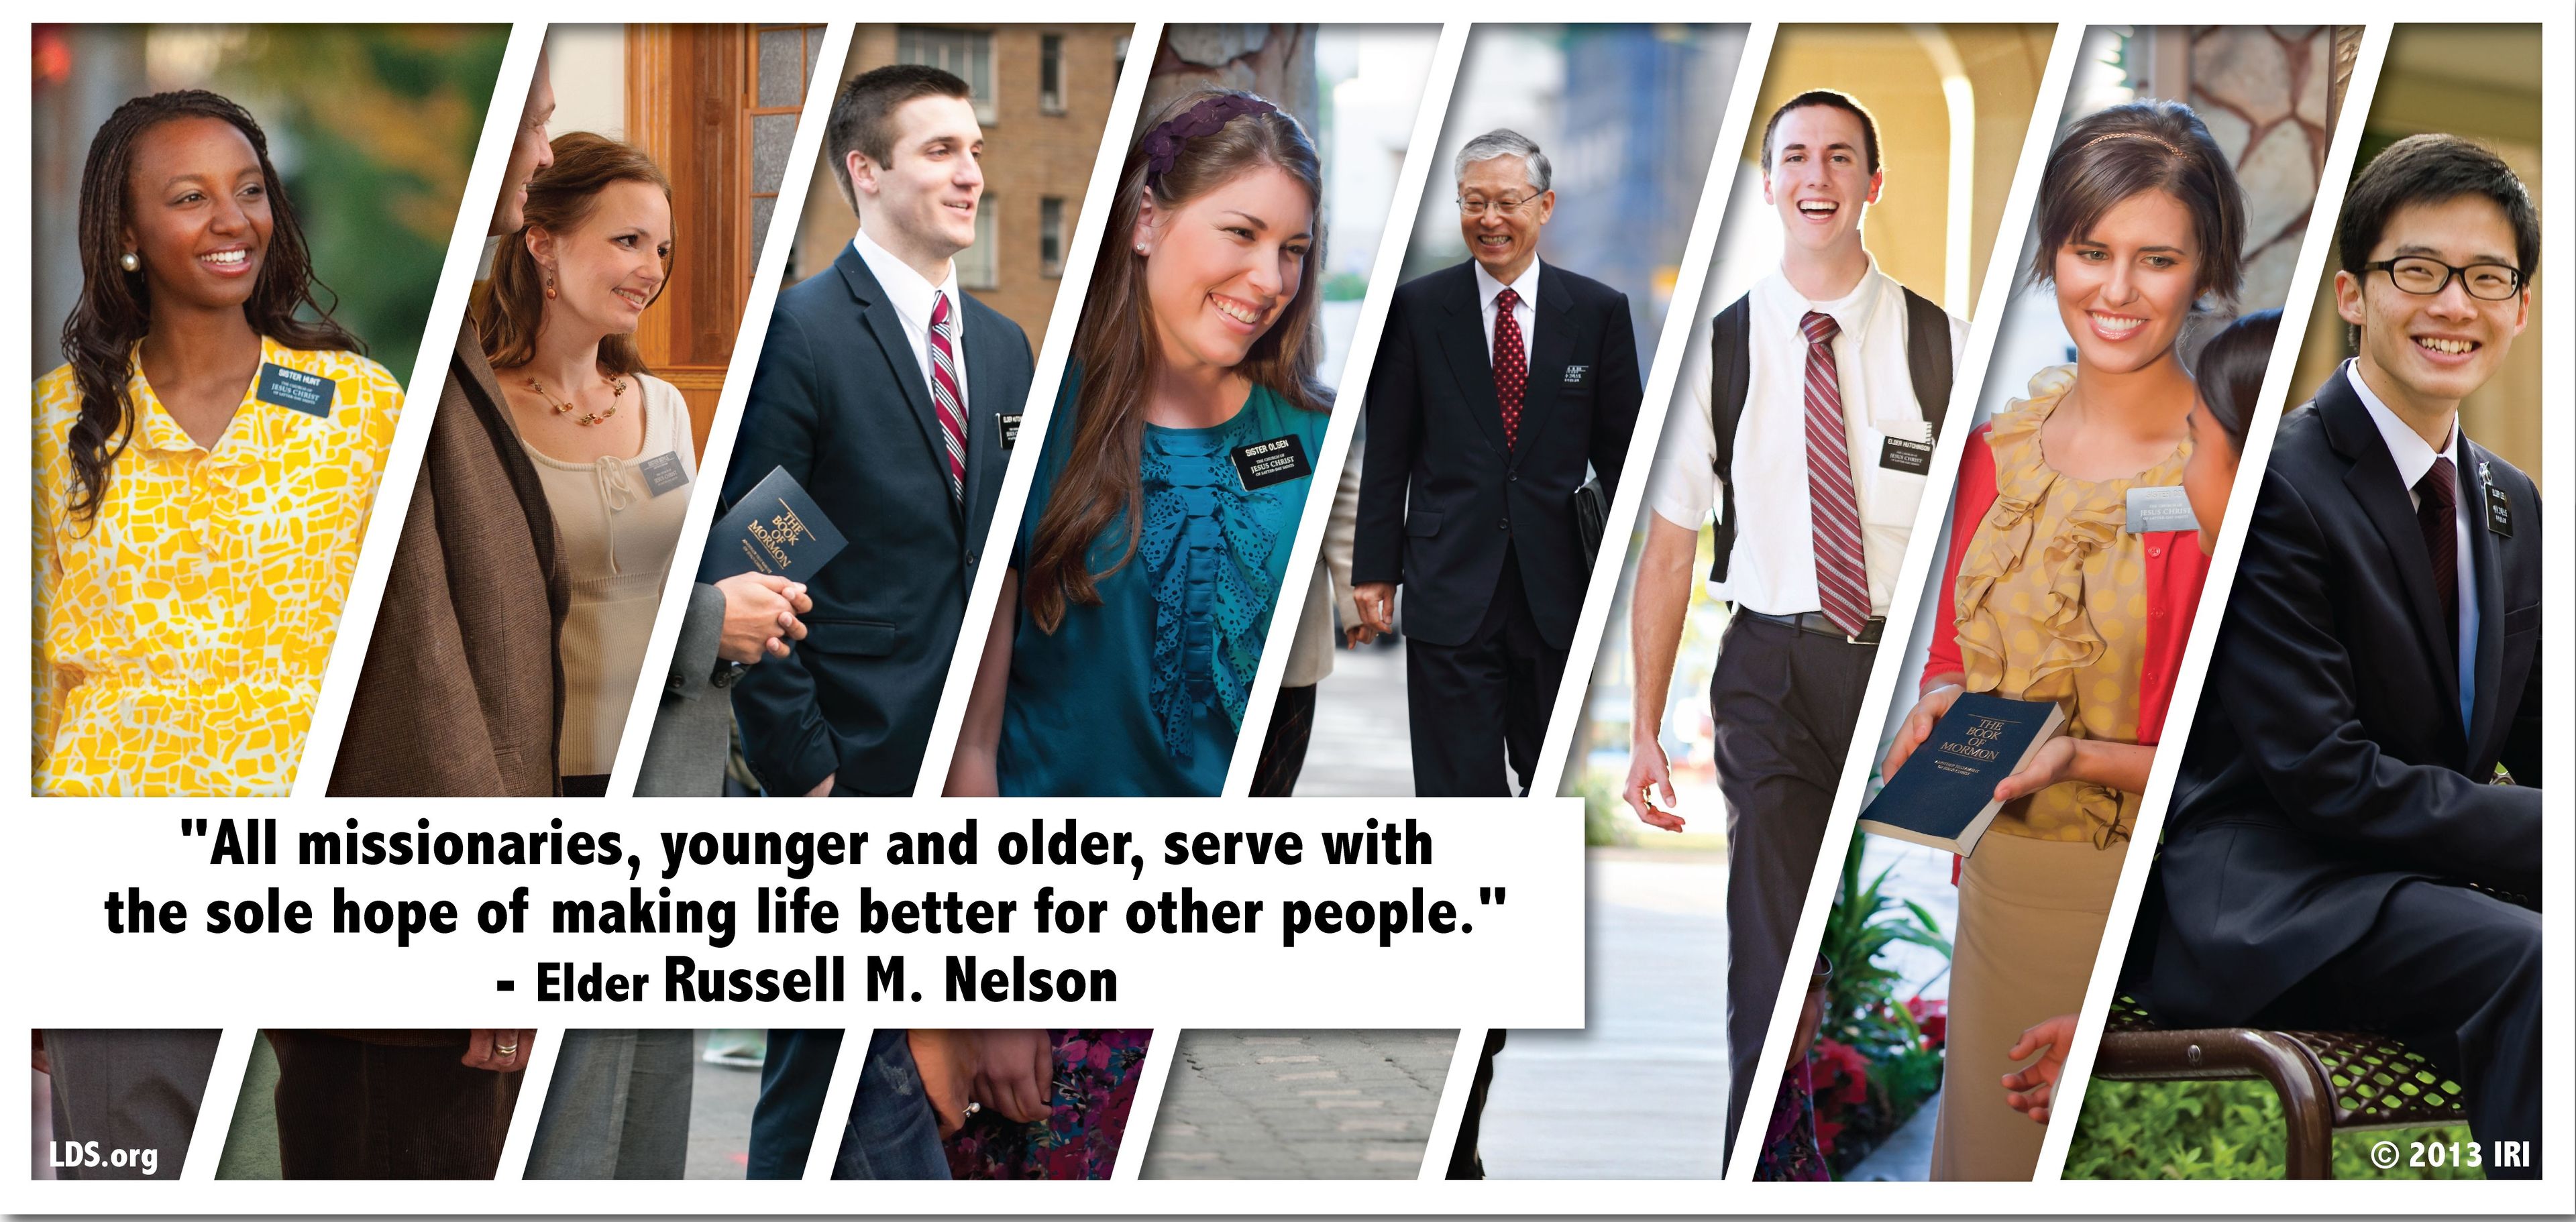 “All missionaries, younger and older, serve with the sole hope of making life better for other people.”—President Russell M. Nelson, “Ask the Missionaries! They Can Help You!” © undefined ipCode 1.